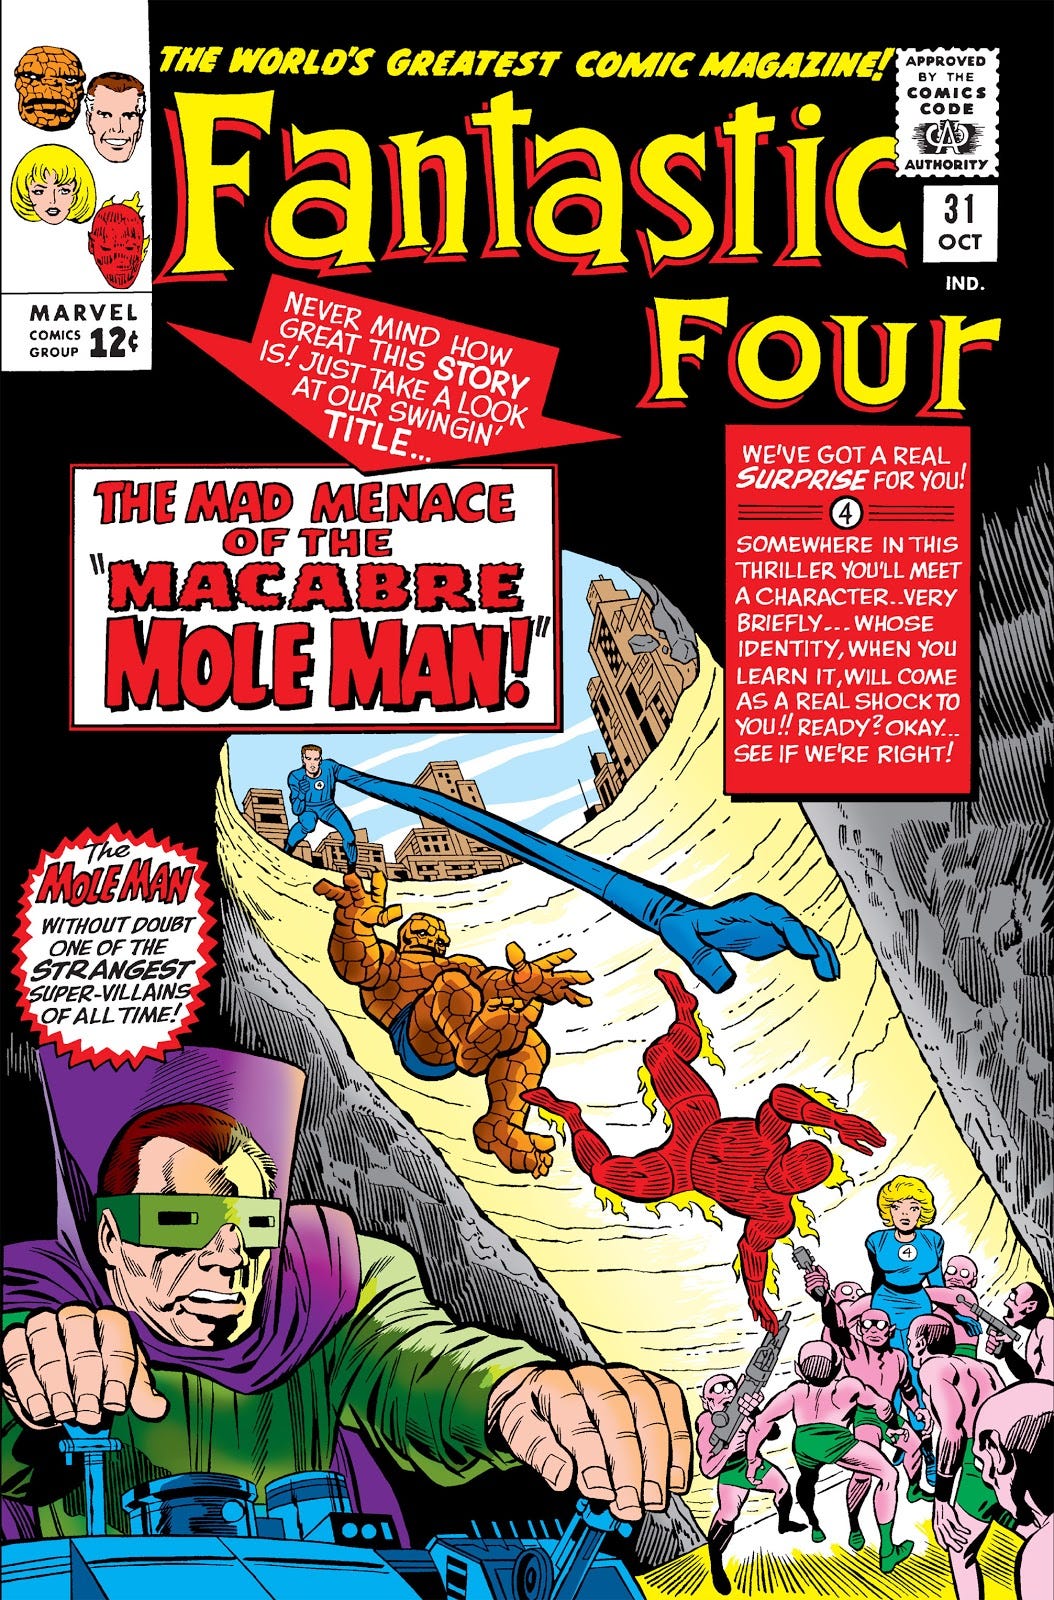 Episode 152: Trial By Combat (Fantastic Four #31) -- October 1964